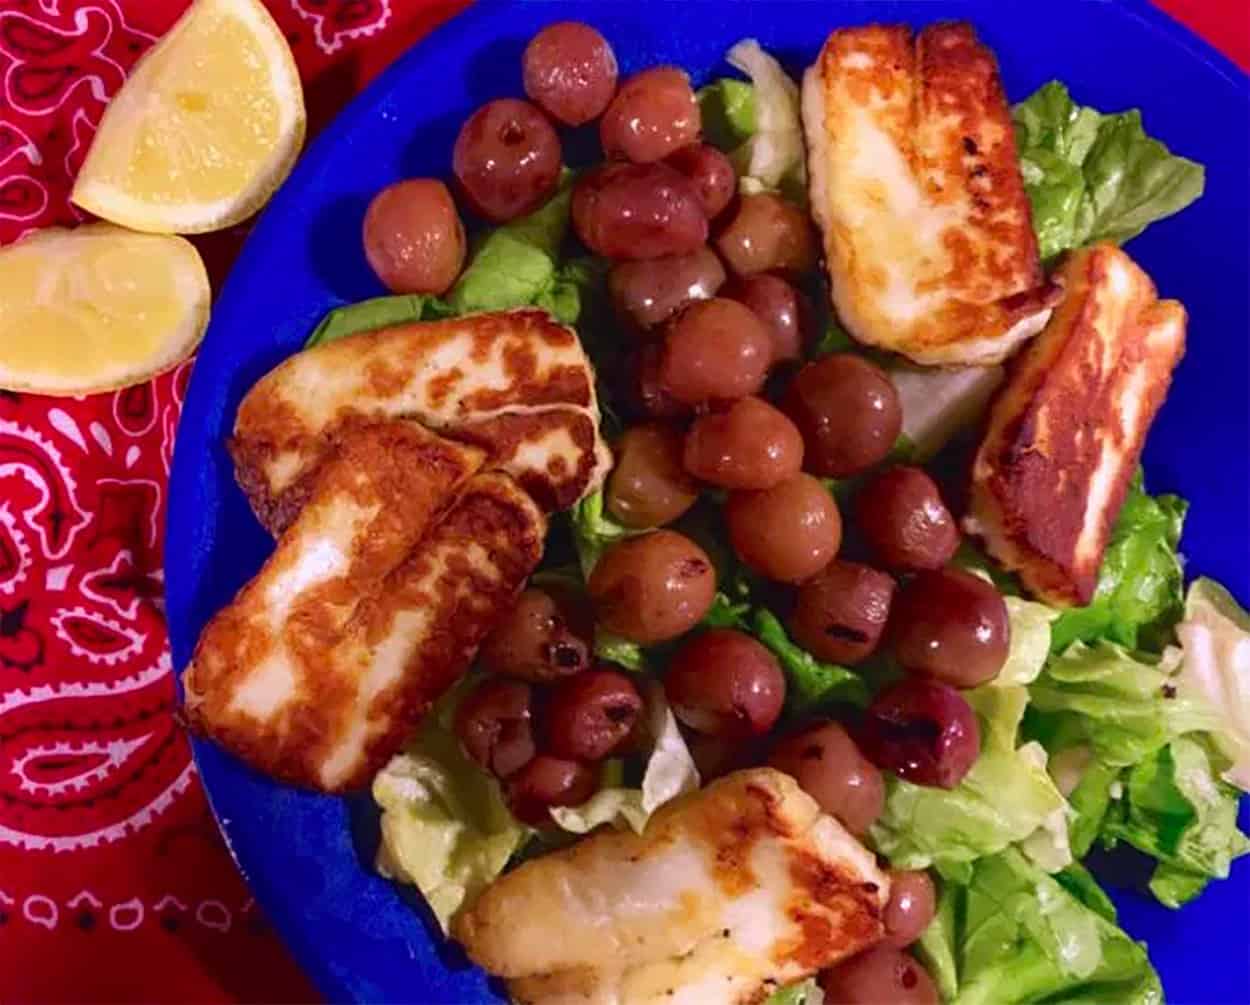 Tasty Salad with grilled grapes andhalloumi cheese.